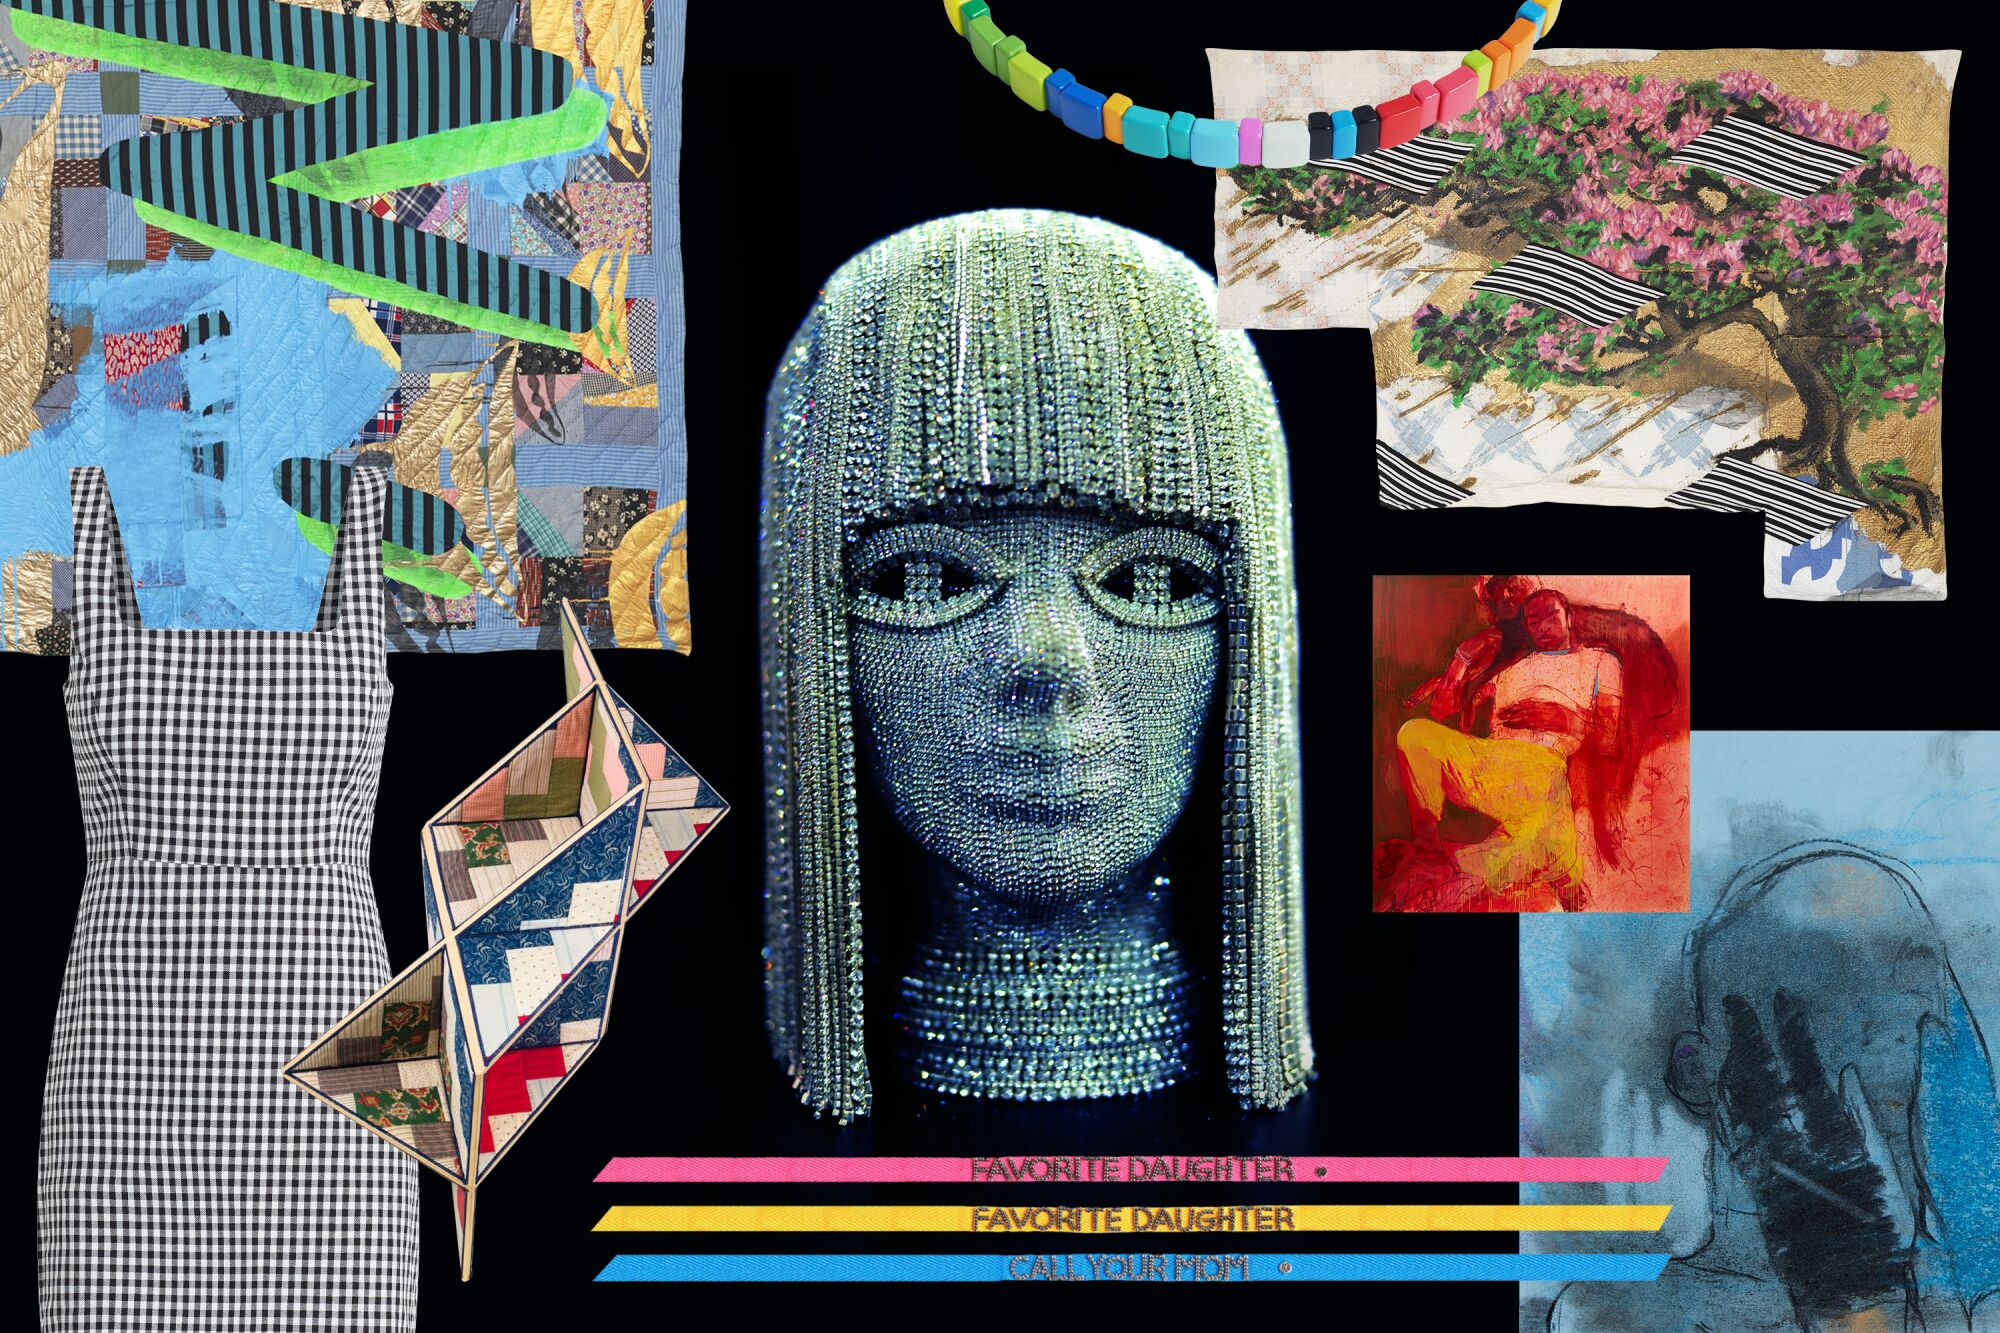 Collage of clothes, sculptures, art in 10 Los Angeles events.